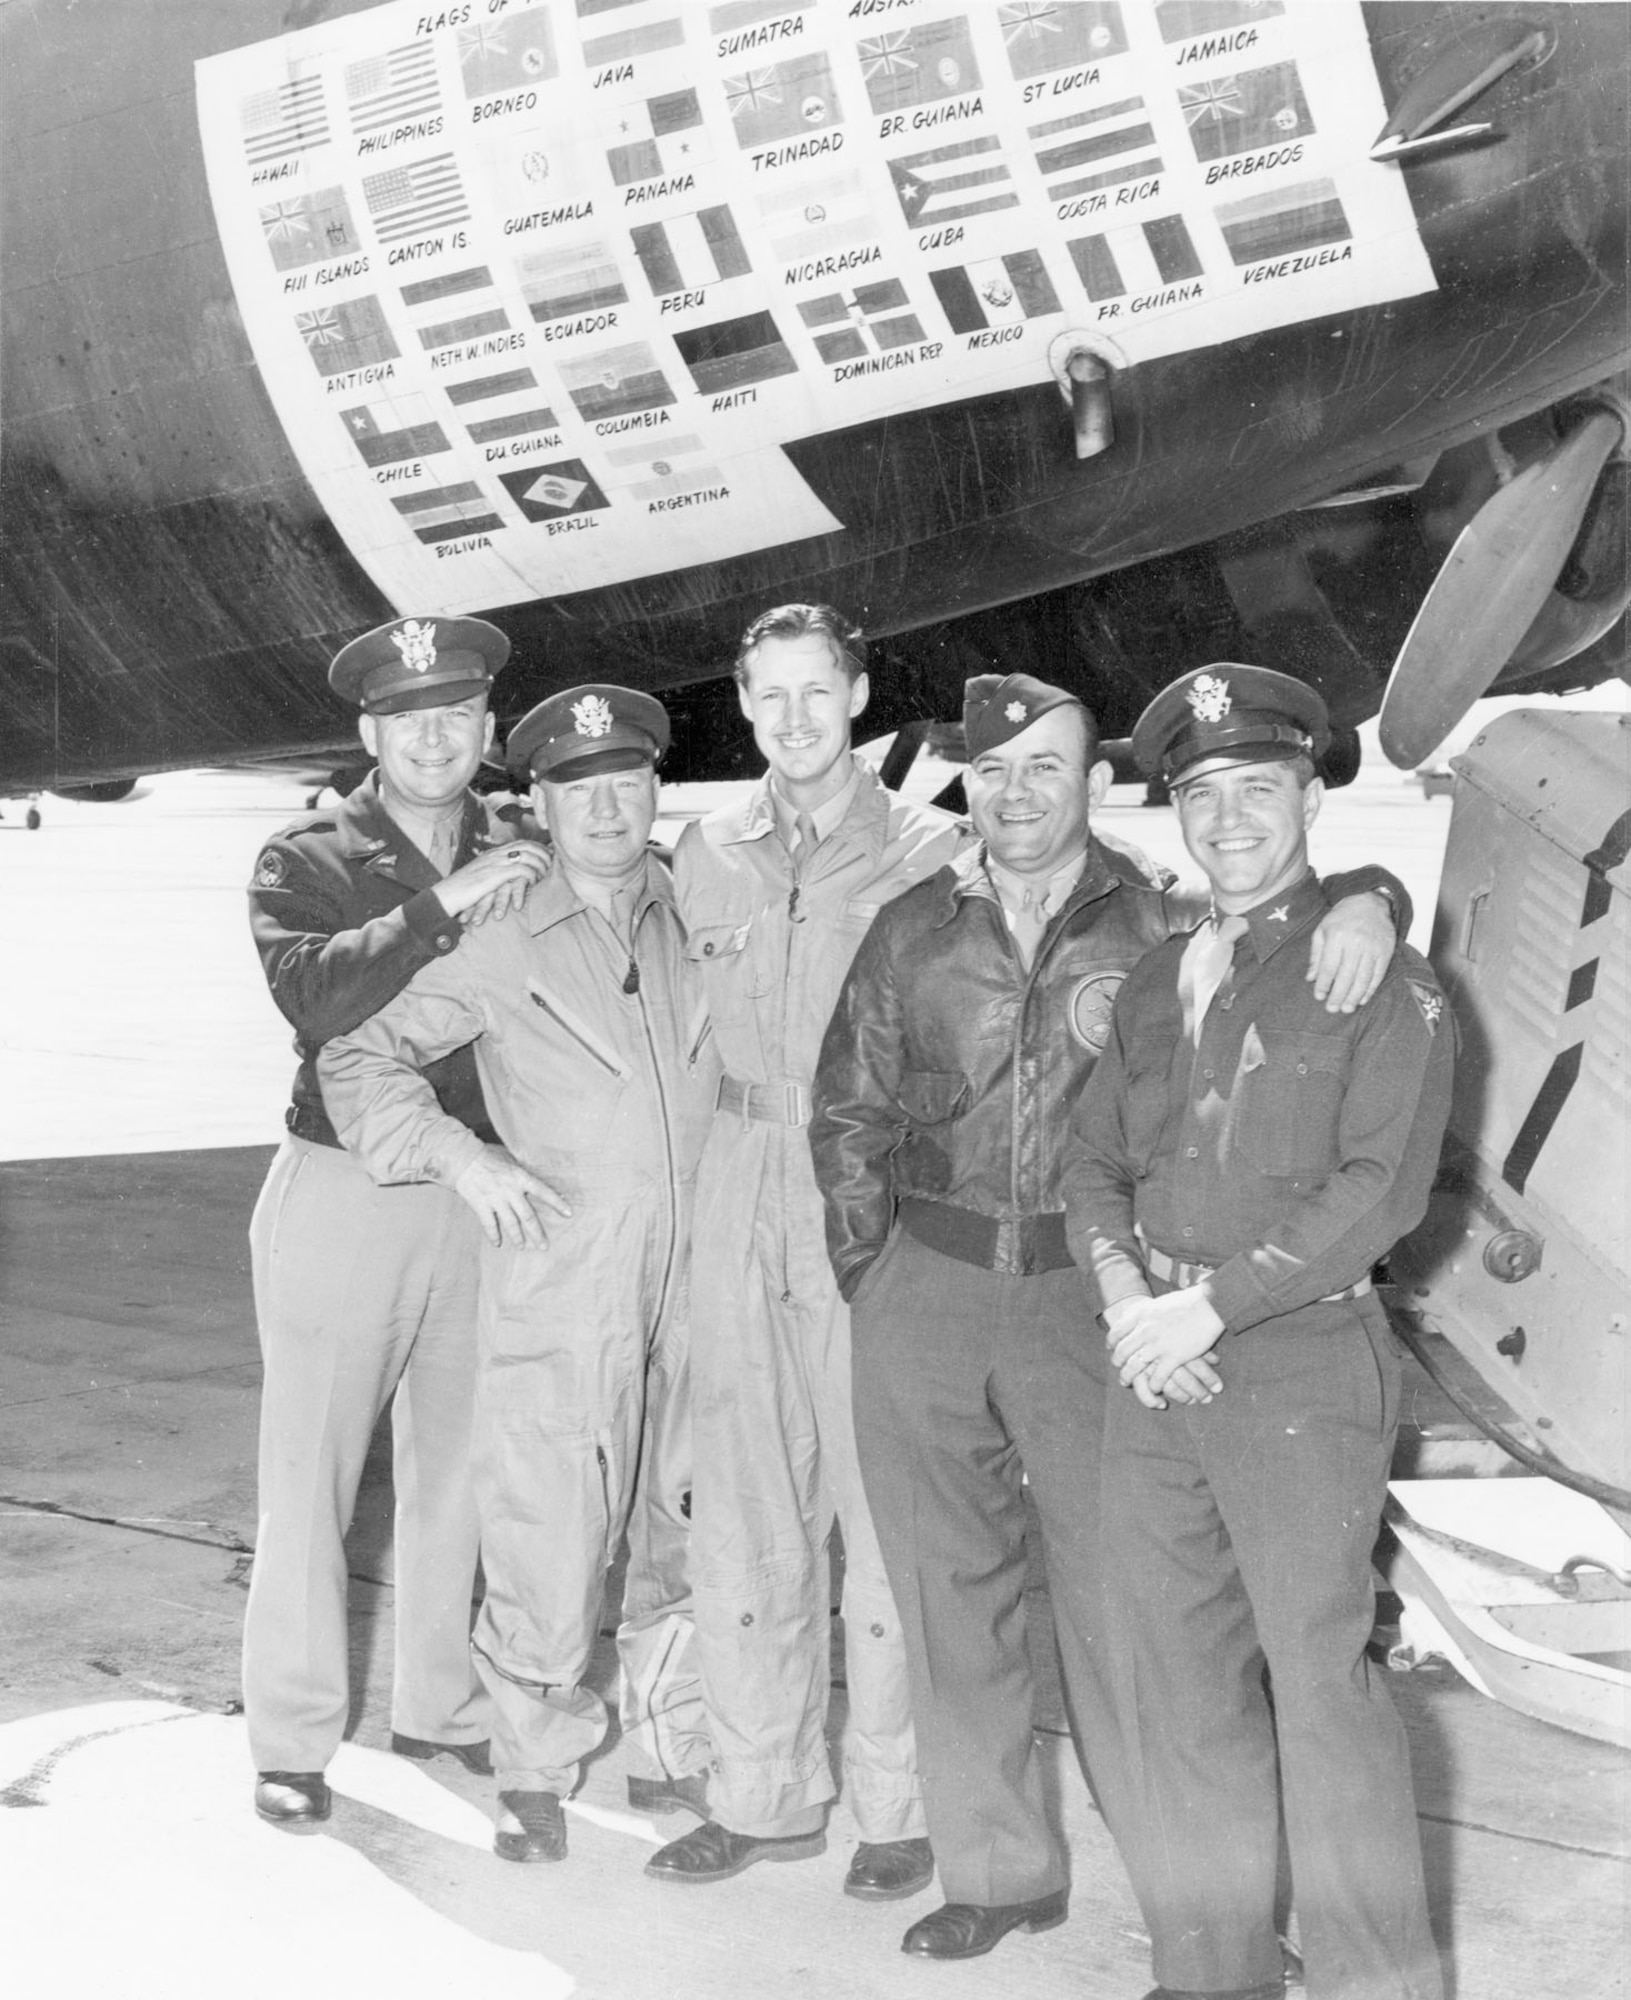 One of crews from "The Swoose" (pictured after the war). From left to right
are Charles Reeves, Harold Varner, Col. Frank Kurtz, Harry Schreiber and
Roland Boone. (U.S. Air Force photo)